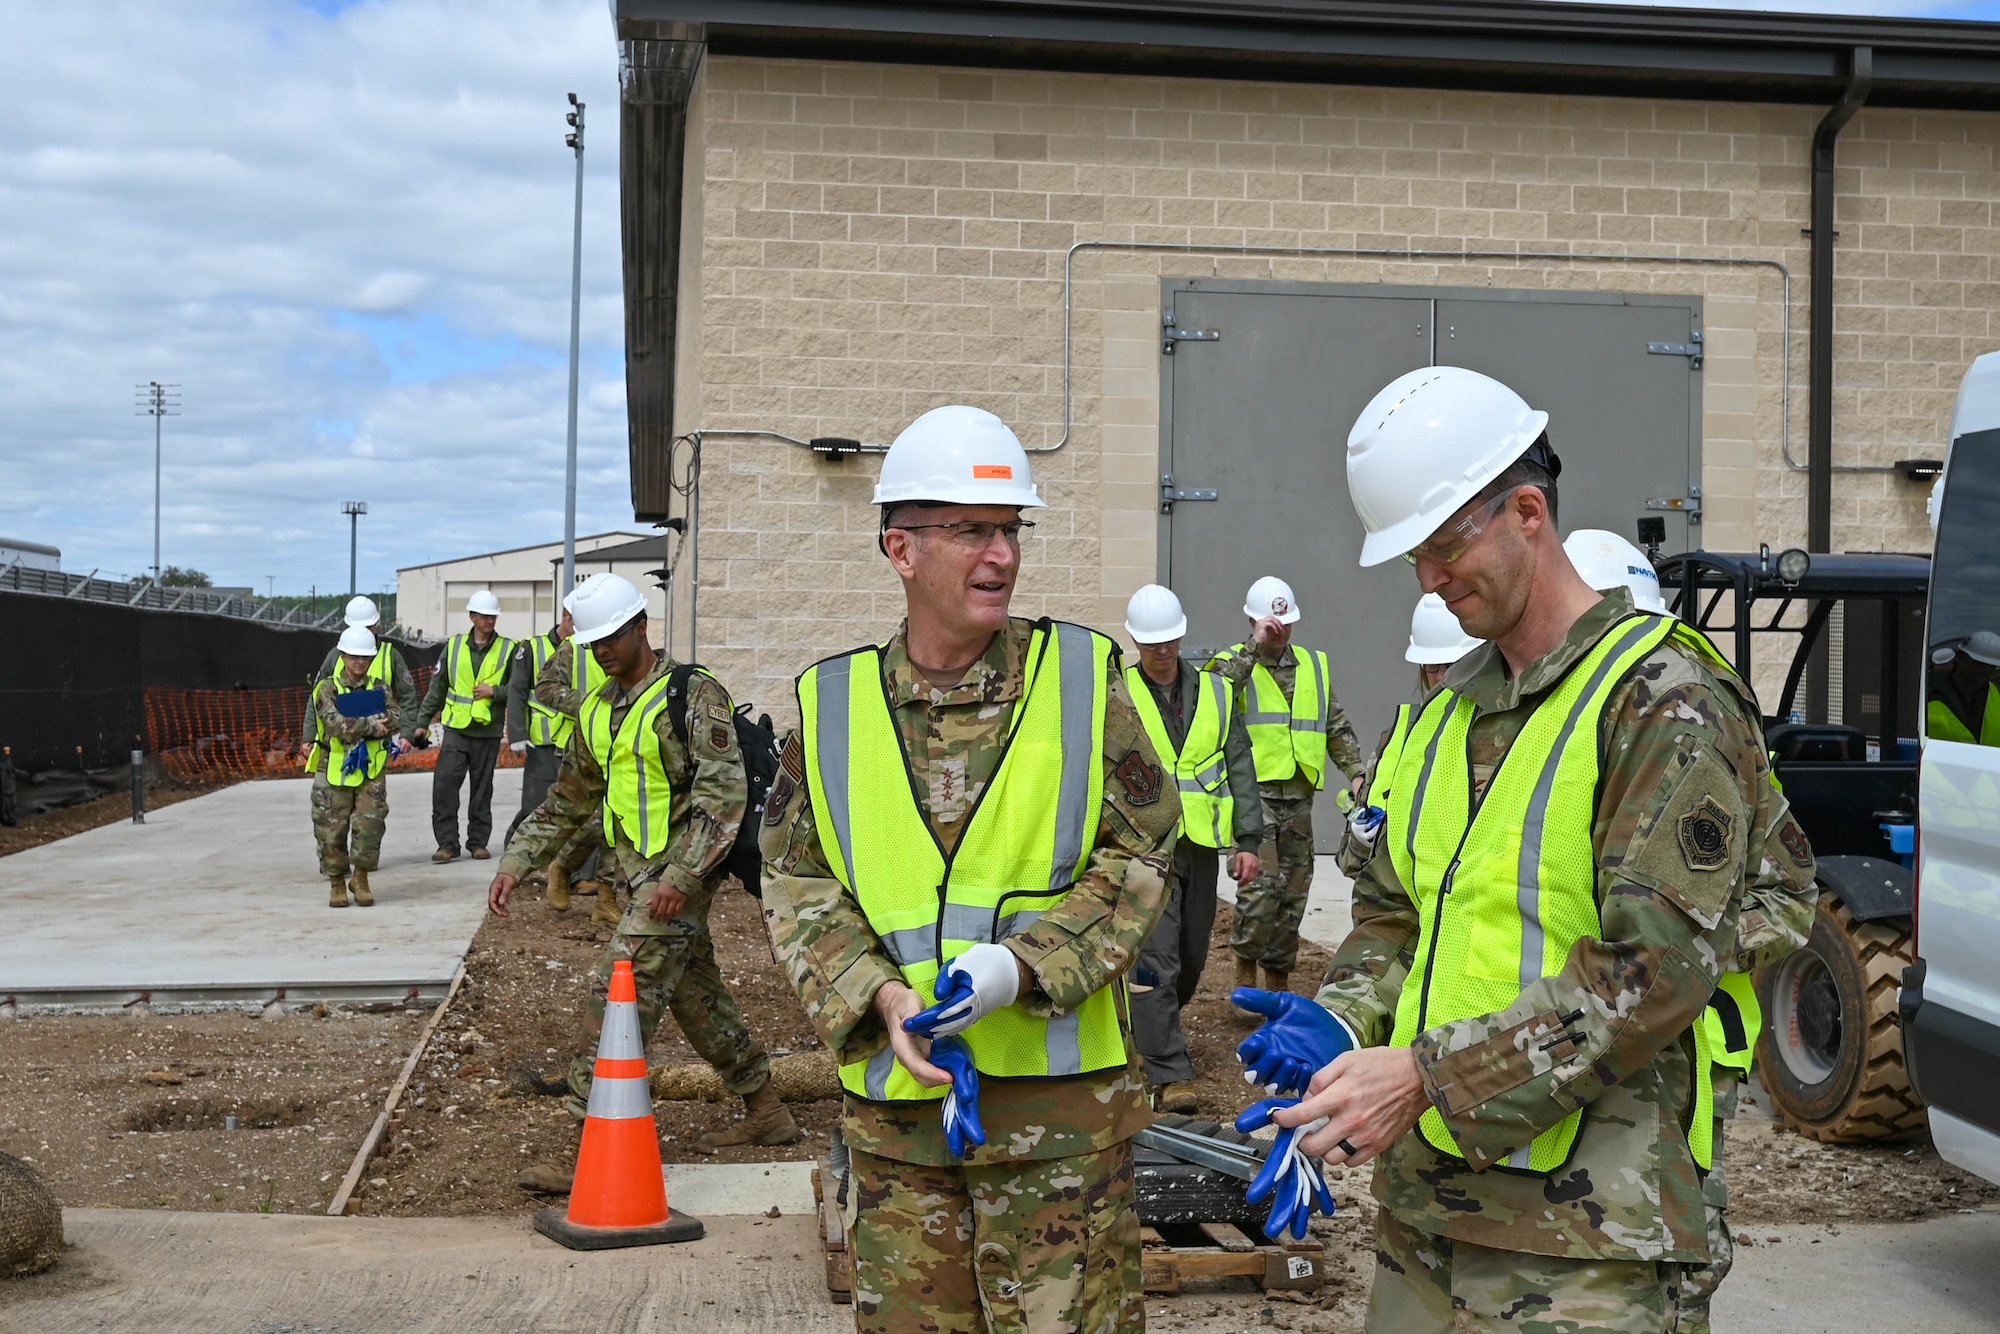 U.S. Air Force Lt. Gen. John Healy, left, chief of the Air Force Reserve (AFR) and commander of Air Force Reserve Command (AFRC), and Col. Benjamin Harrison, 301st Fighter Wing commander, exit construction area at Naval Air Station Joint Reserve Base Fort Worth, Texas April 2, 2024. AFRC leadership alongside 301st FW commanders toured facilities in preparation for the F-35 by the Program integration office. (U.S. Air Force photo by Nije Hightower)